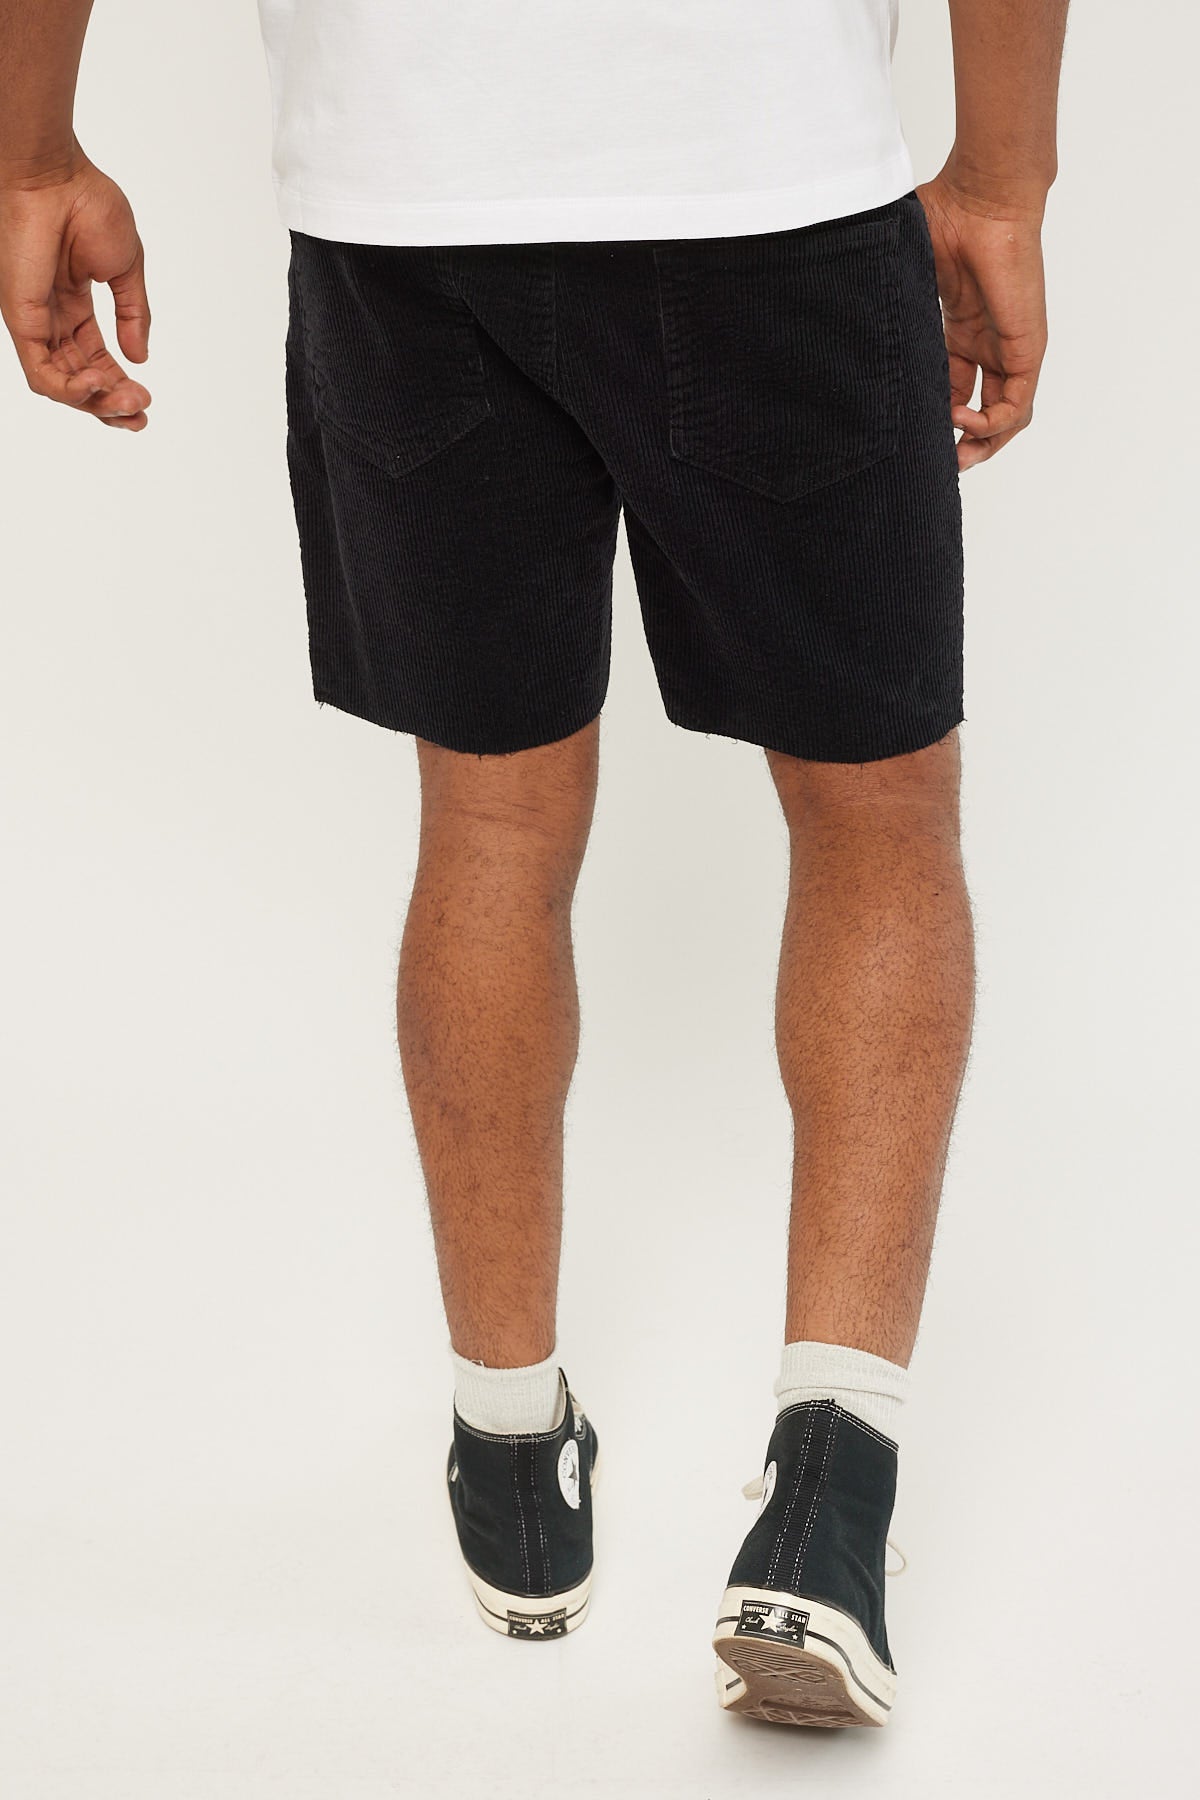 Common Need Sinister Cord Short Black